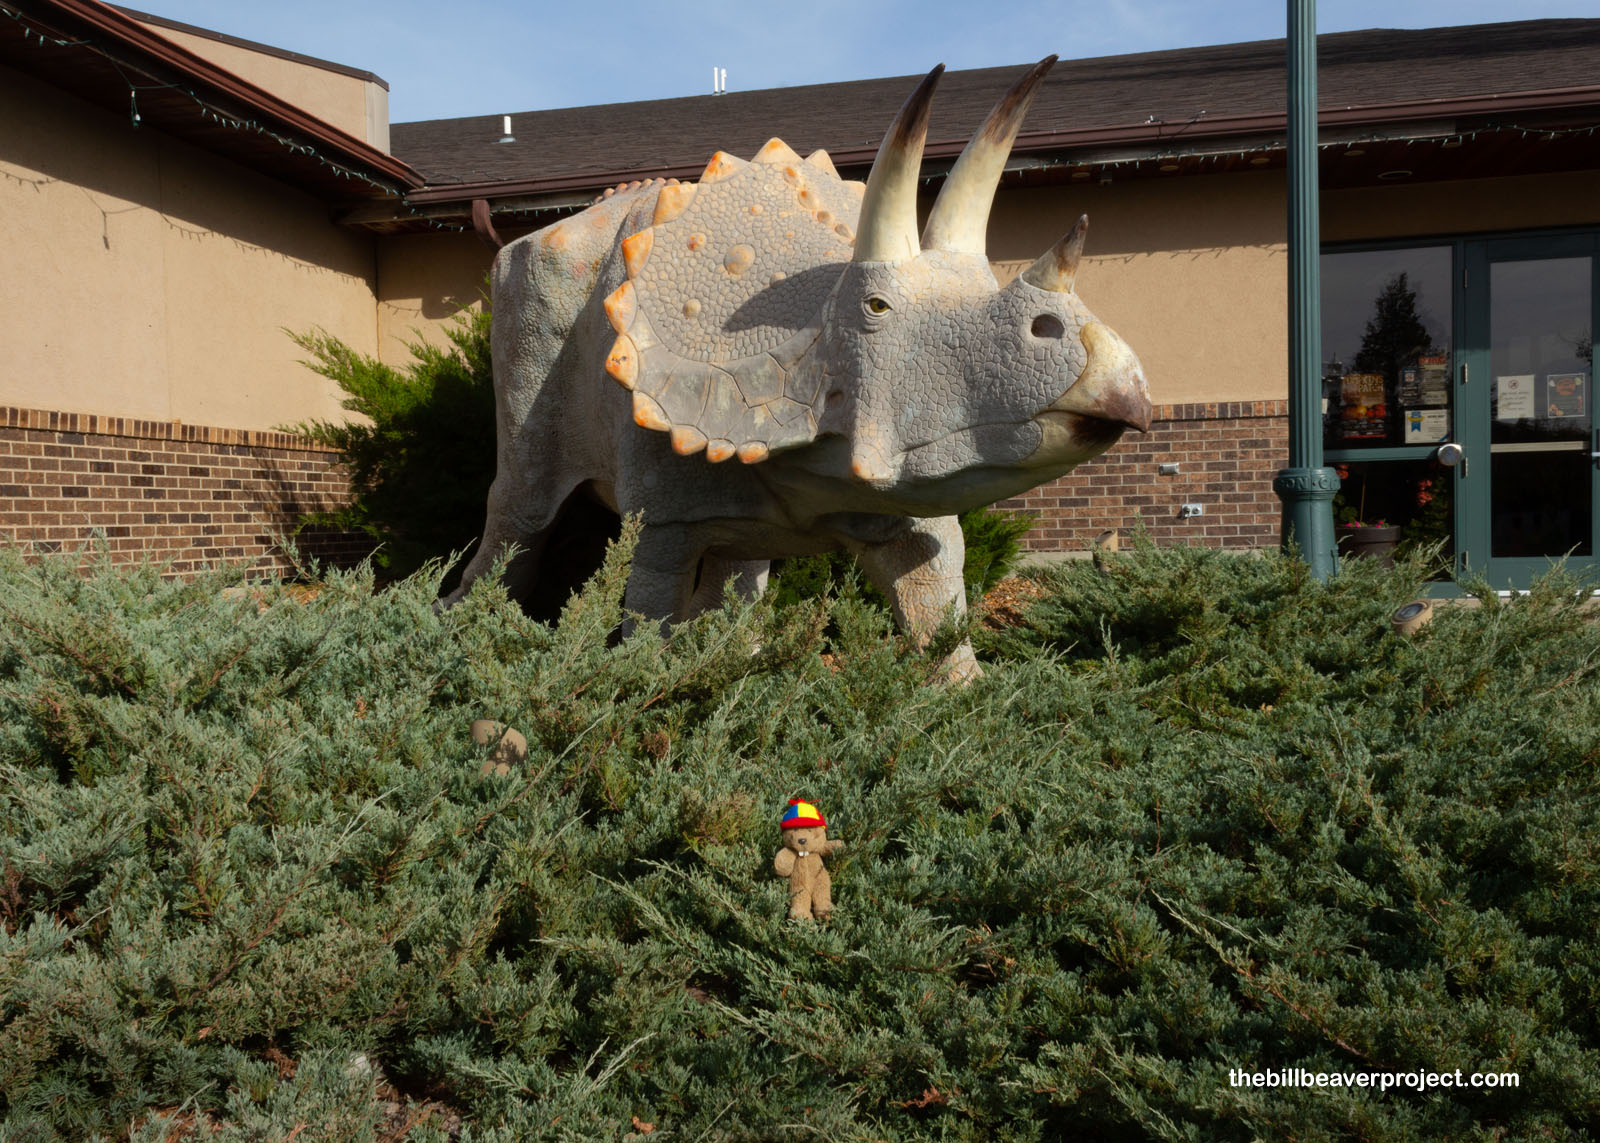 A huge Triceratops at the entrance!